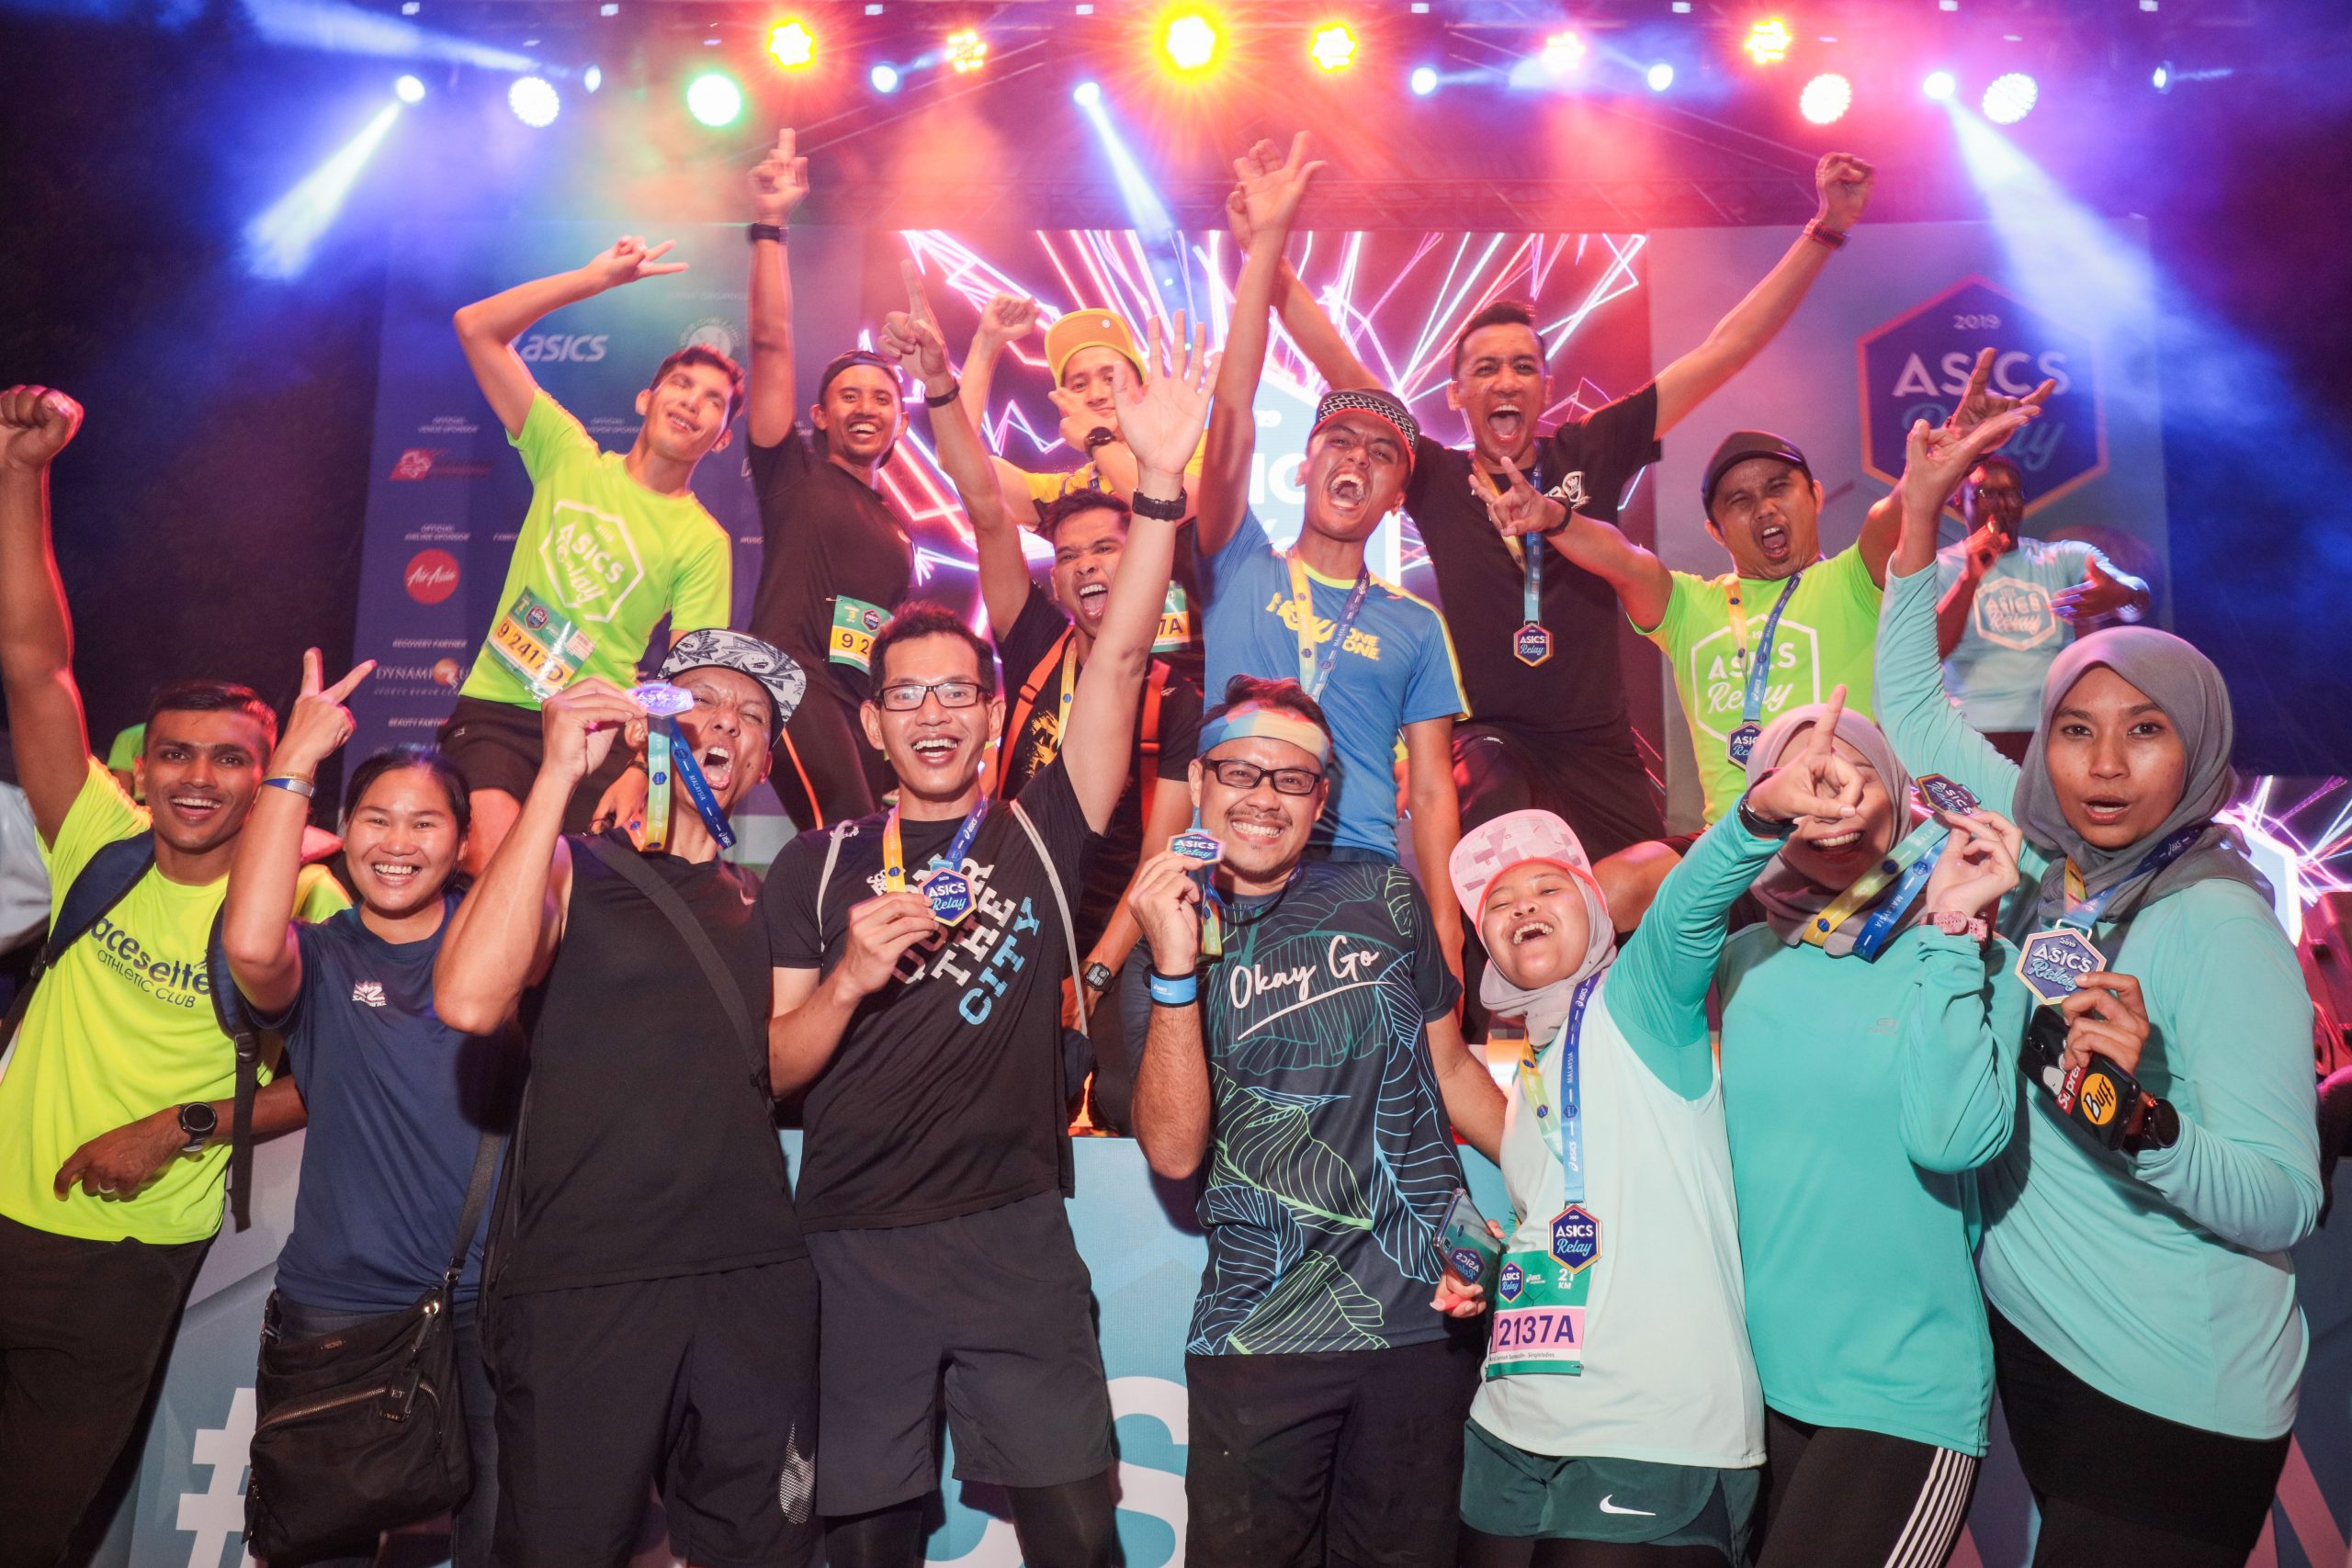 ASICS Malaysia brings together 4,000 runners at the 2019 ASICS relay